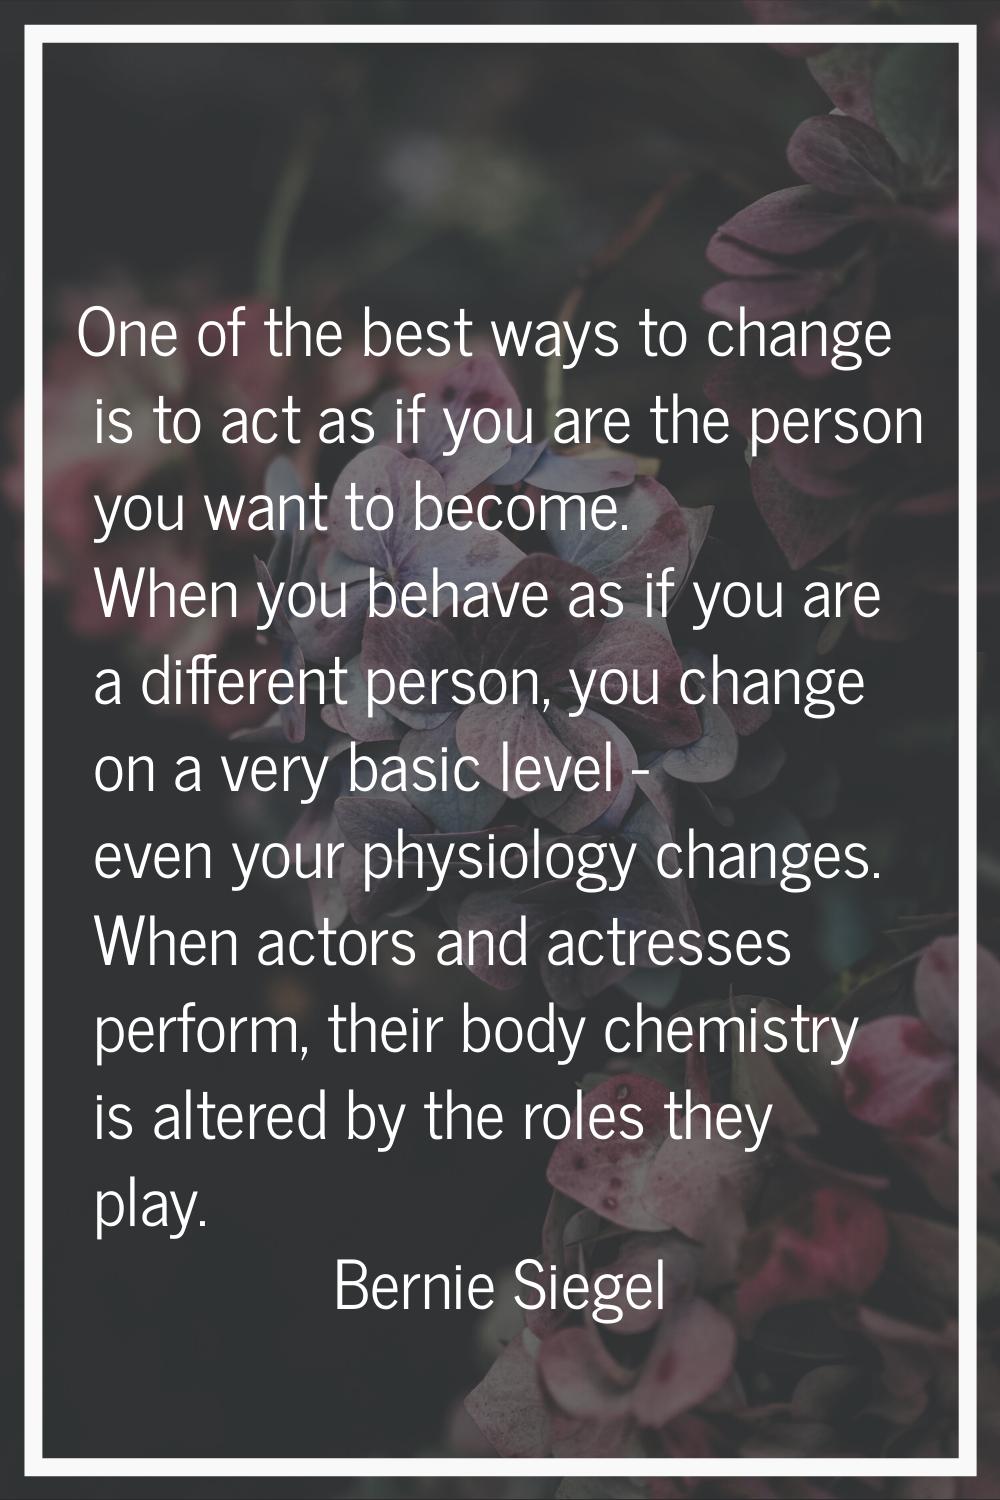 One of the best ways to change is to act as if you are the person you want to become. When you beha